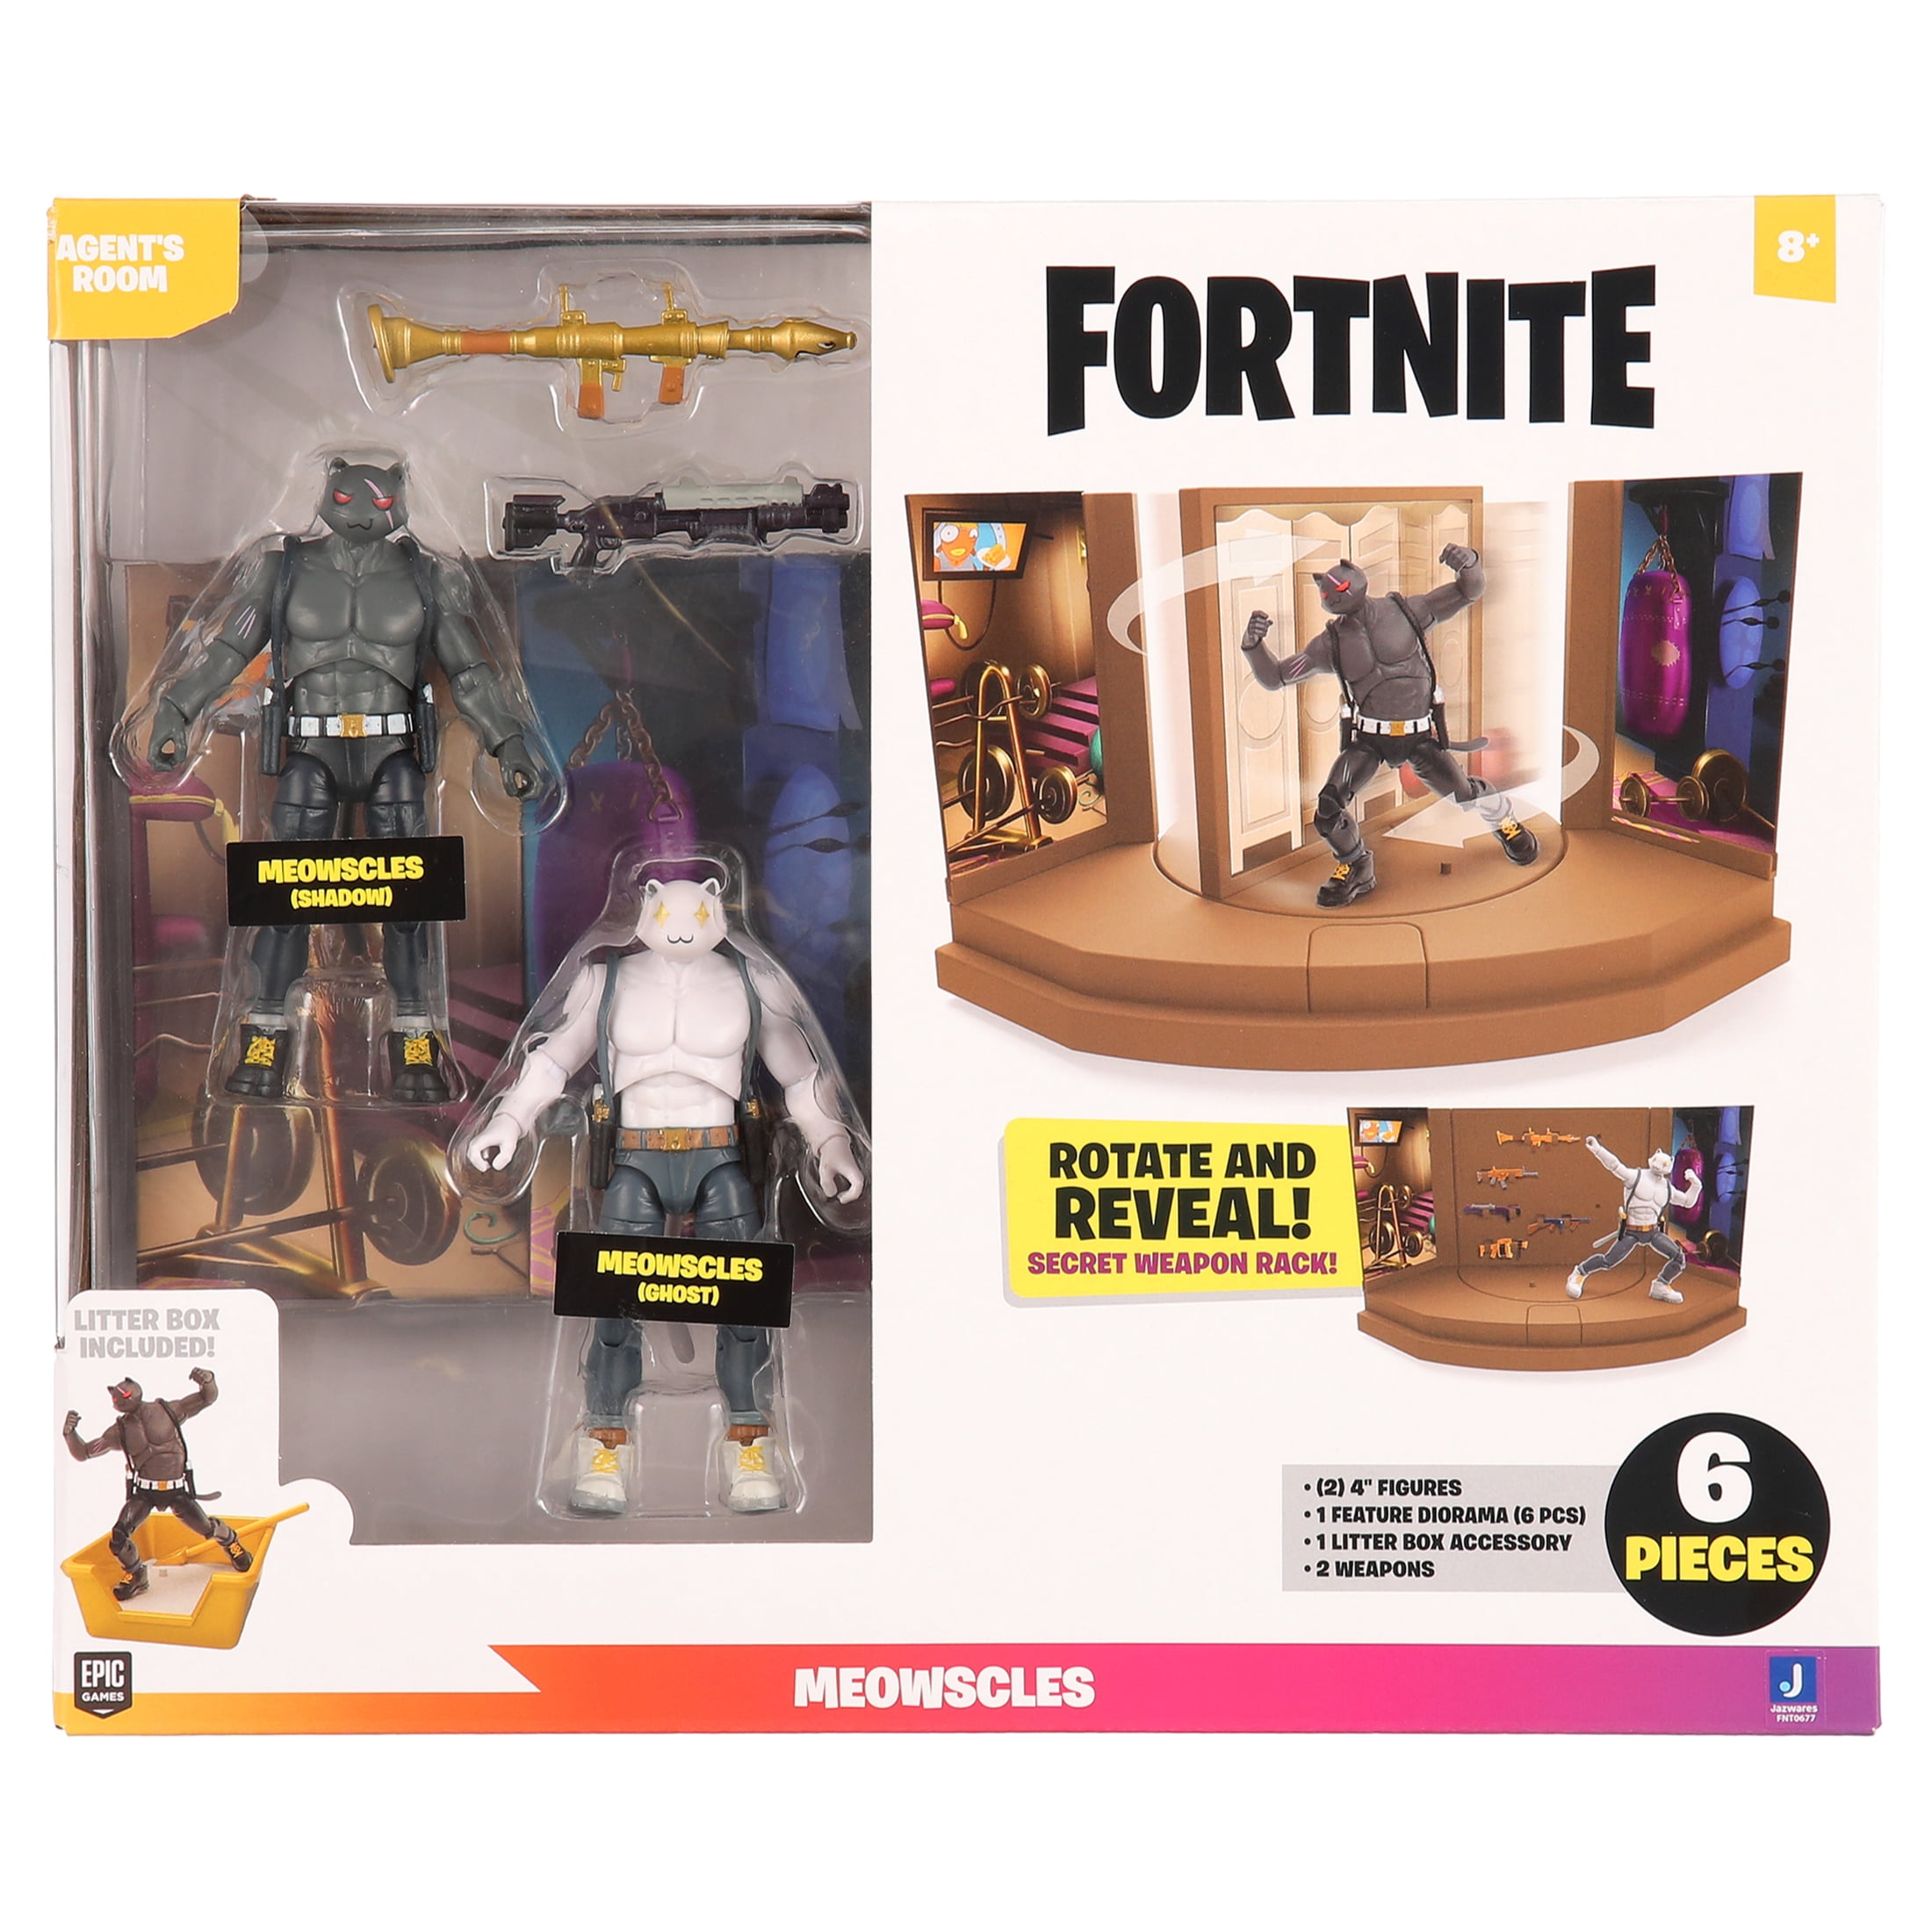 Fortnite Agent's Room Assortment, includes 2 Articulated Figures, Playset with Secret Passageway, Legendary Accessories, Weapons, Accessory Storage - Walmart.com